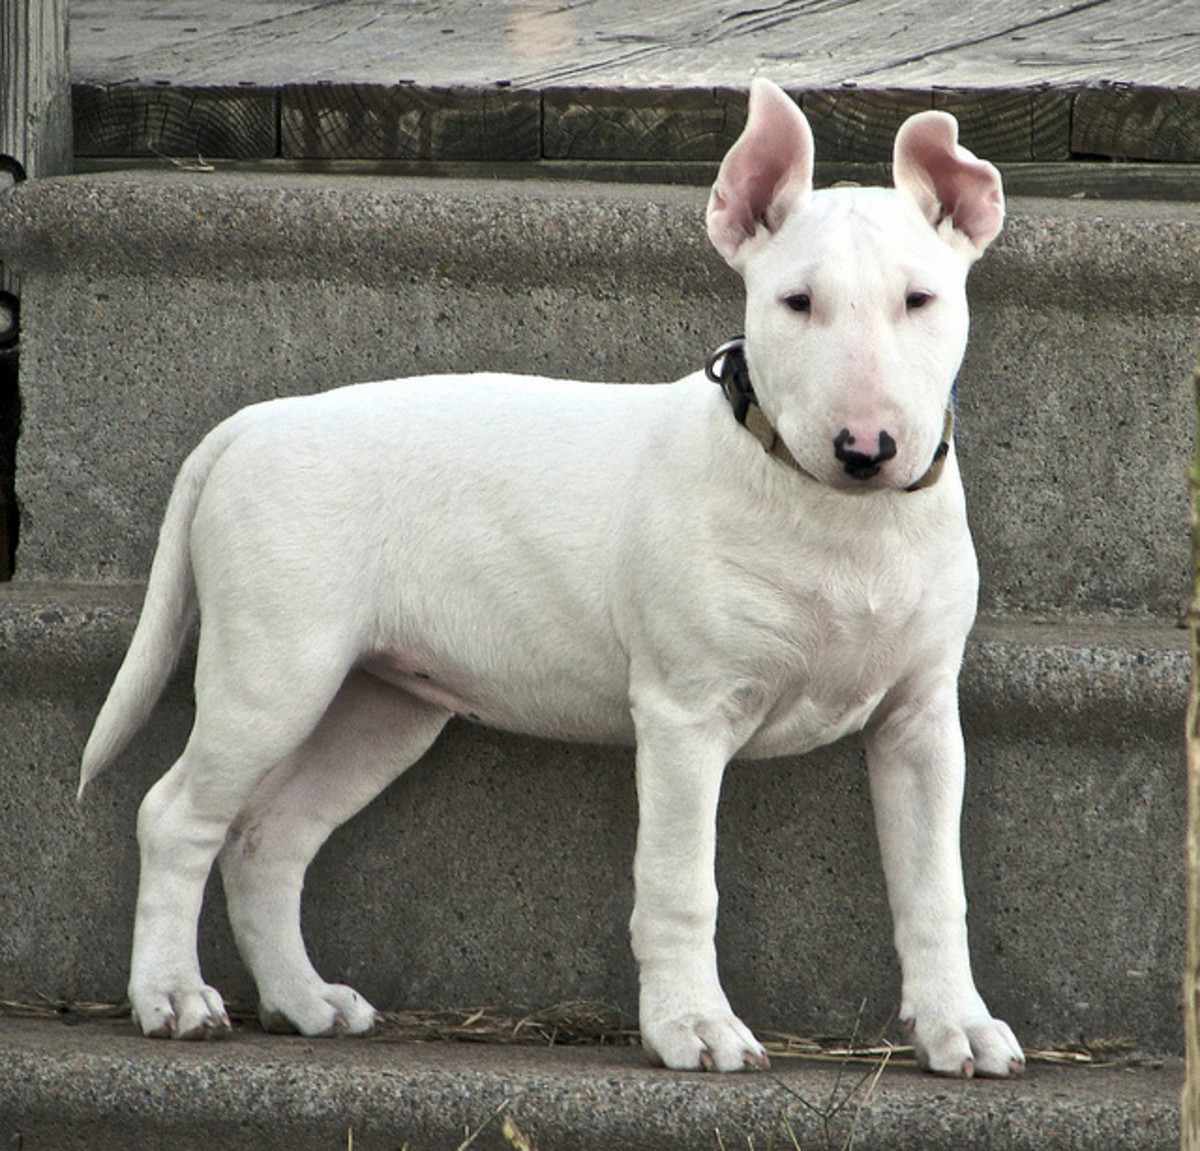 Bull terriers might have tough reputations but they are good dogs for an apartment.